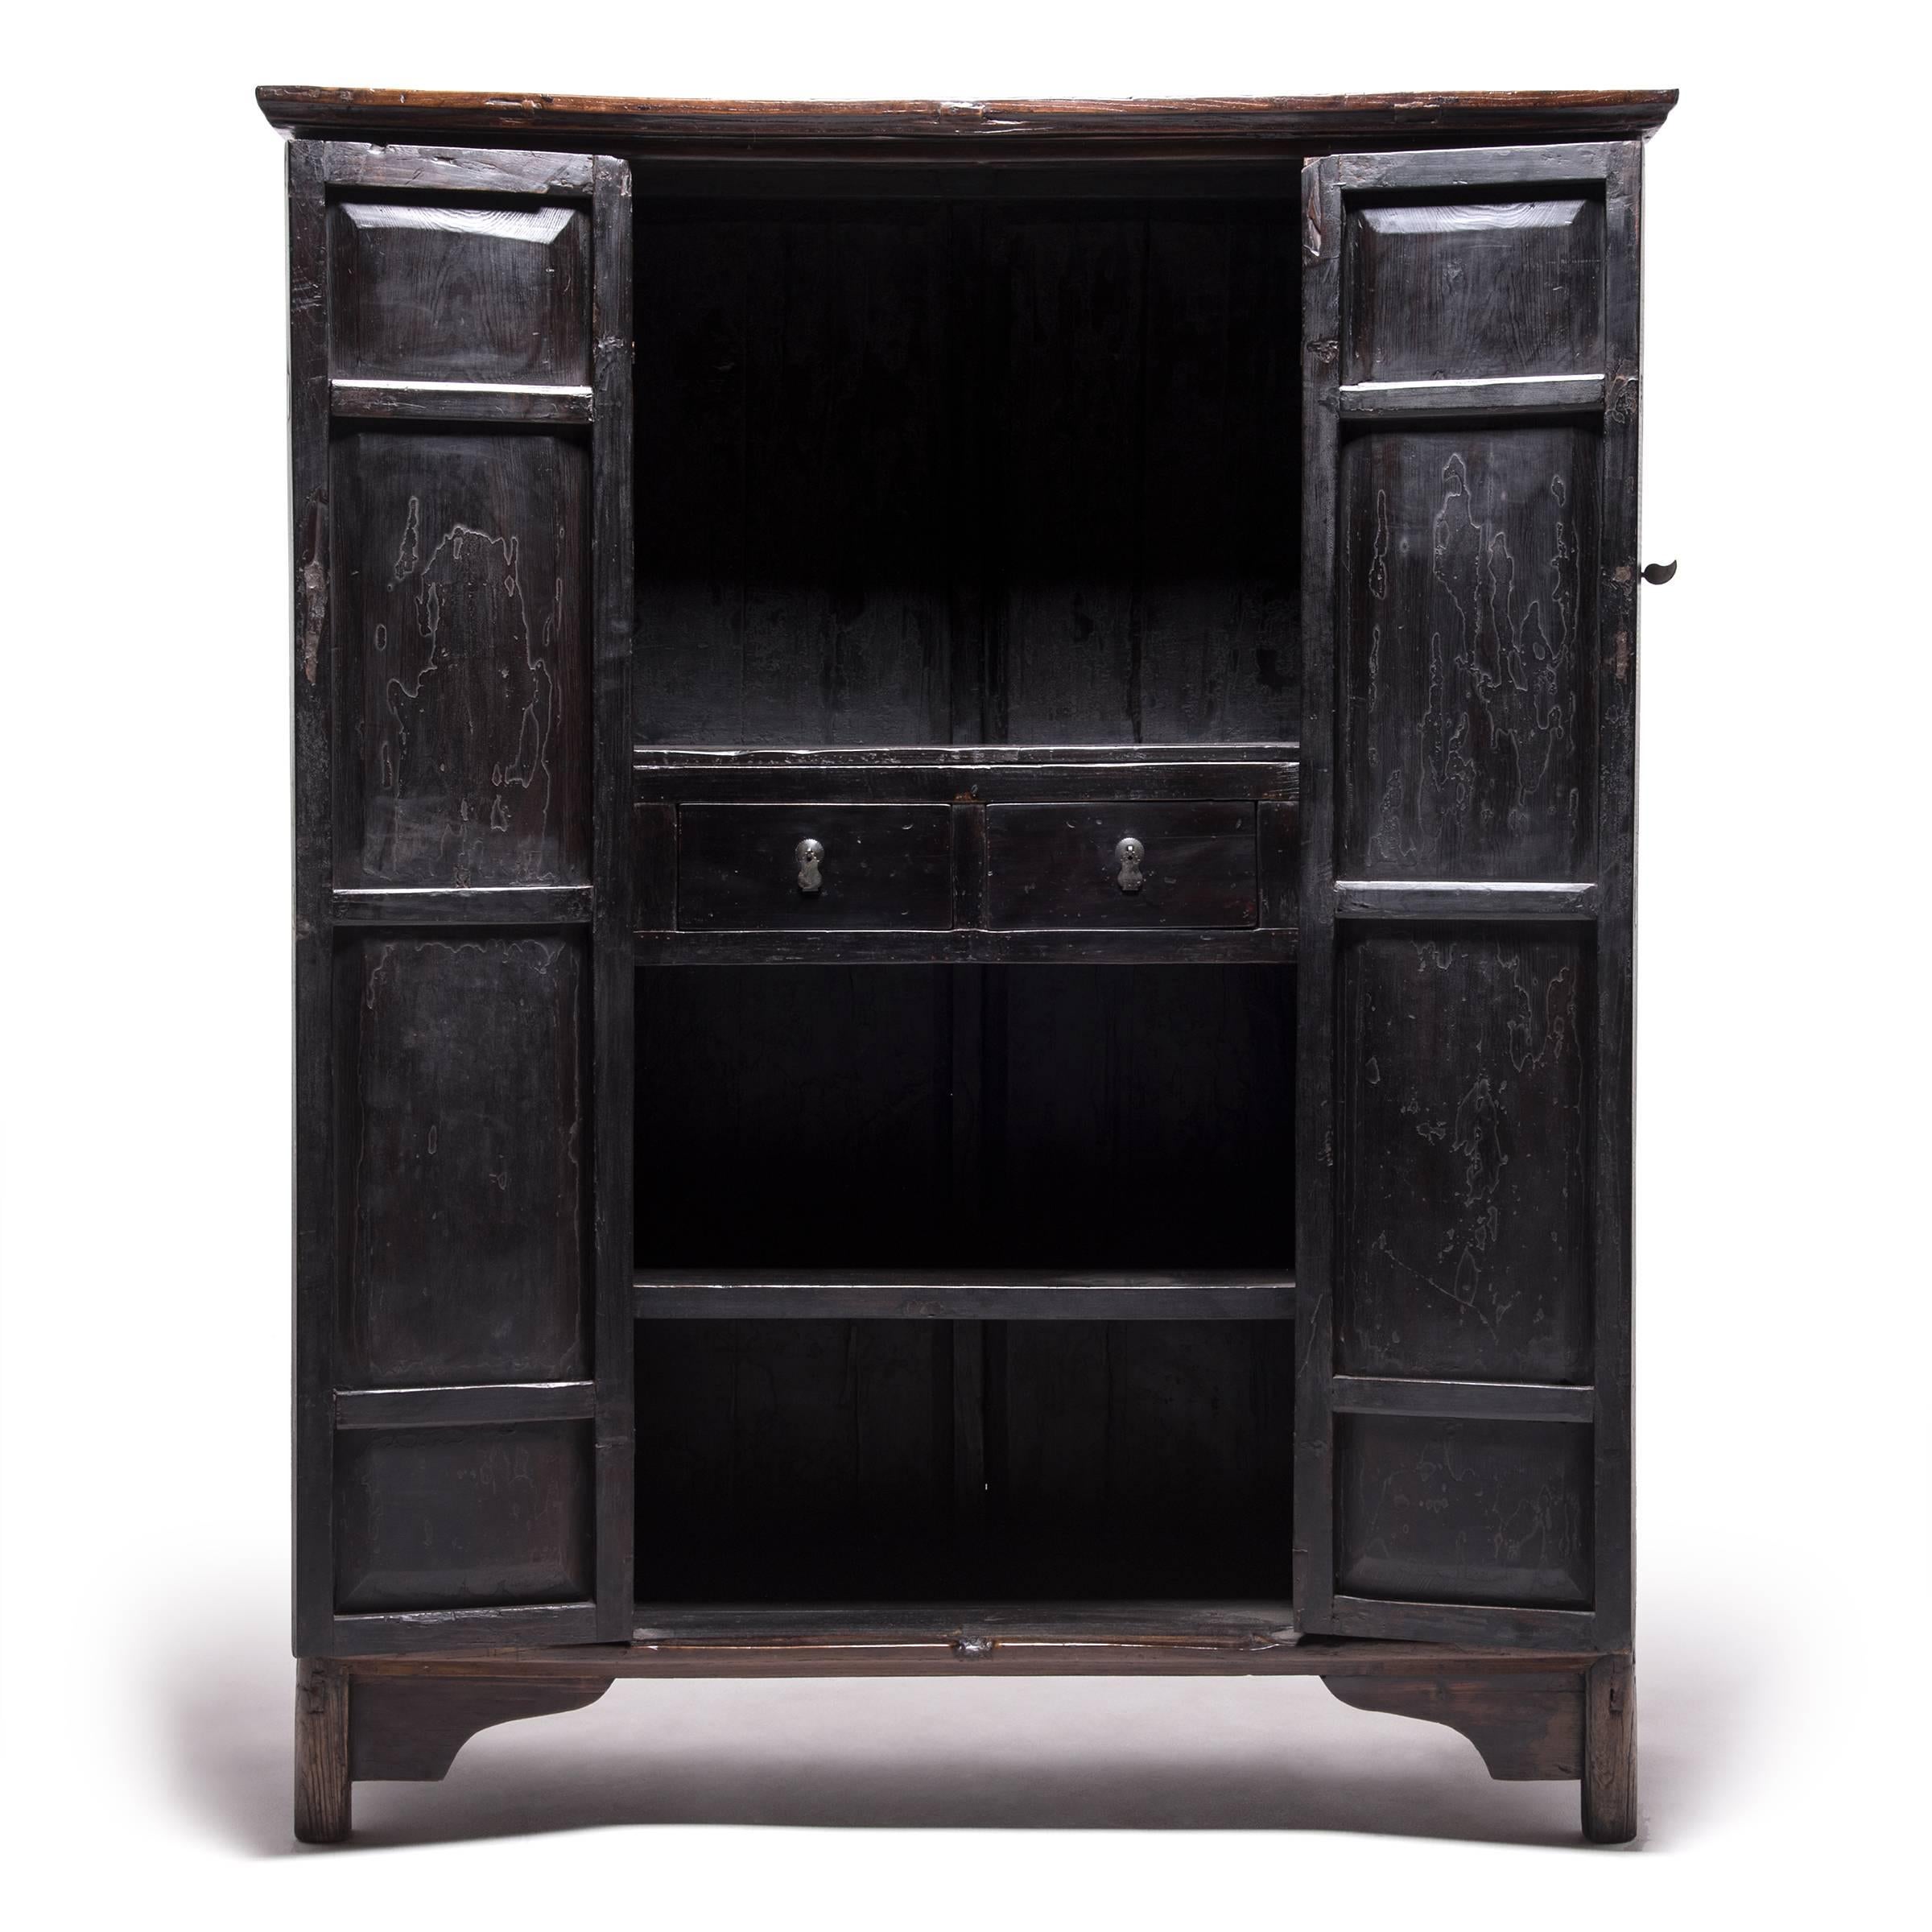 The Qing-dynasty cabinetmaker who designed this handsome two-door cabinet was a master of their craft, and elevated the joinery to a new artistic level. This monumental Chinese cabinet was constructed with mortise and tenon construction, without the